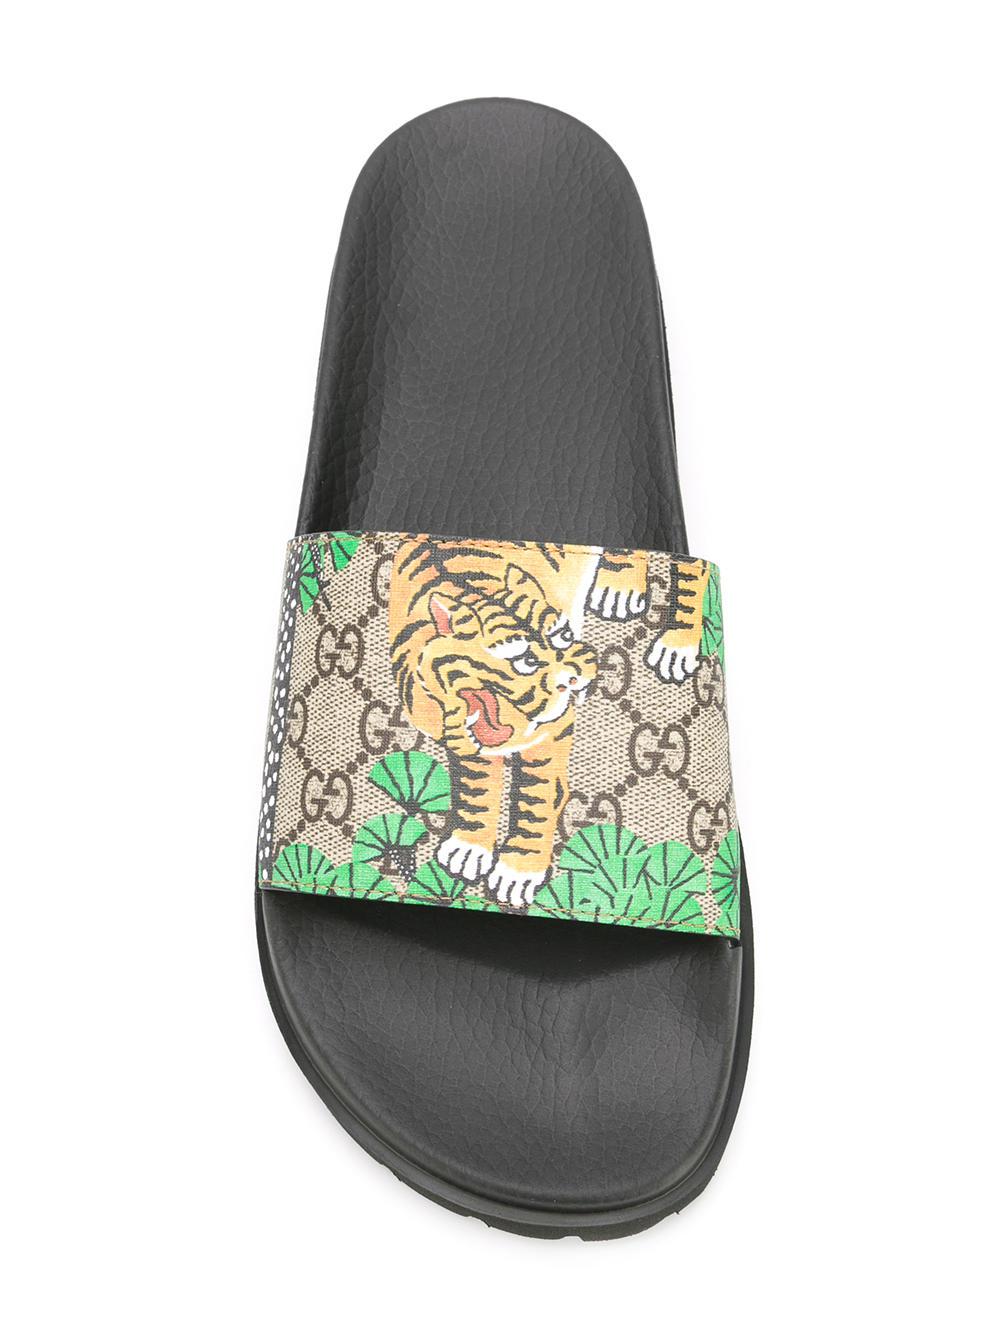 Gucci Mens Gg Supreme Wolf Head Slide Sandals in Natural 